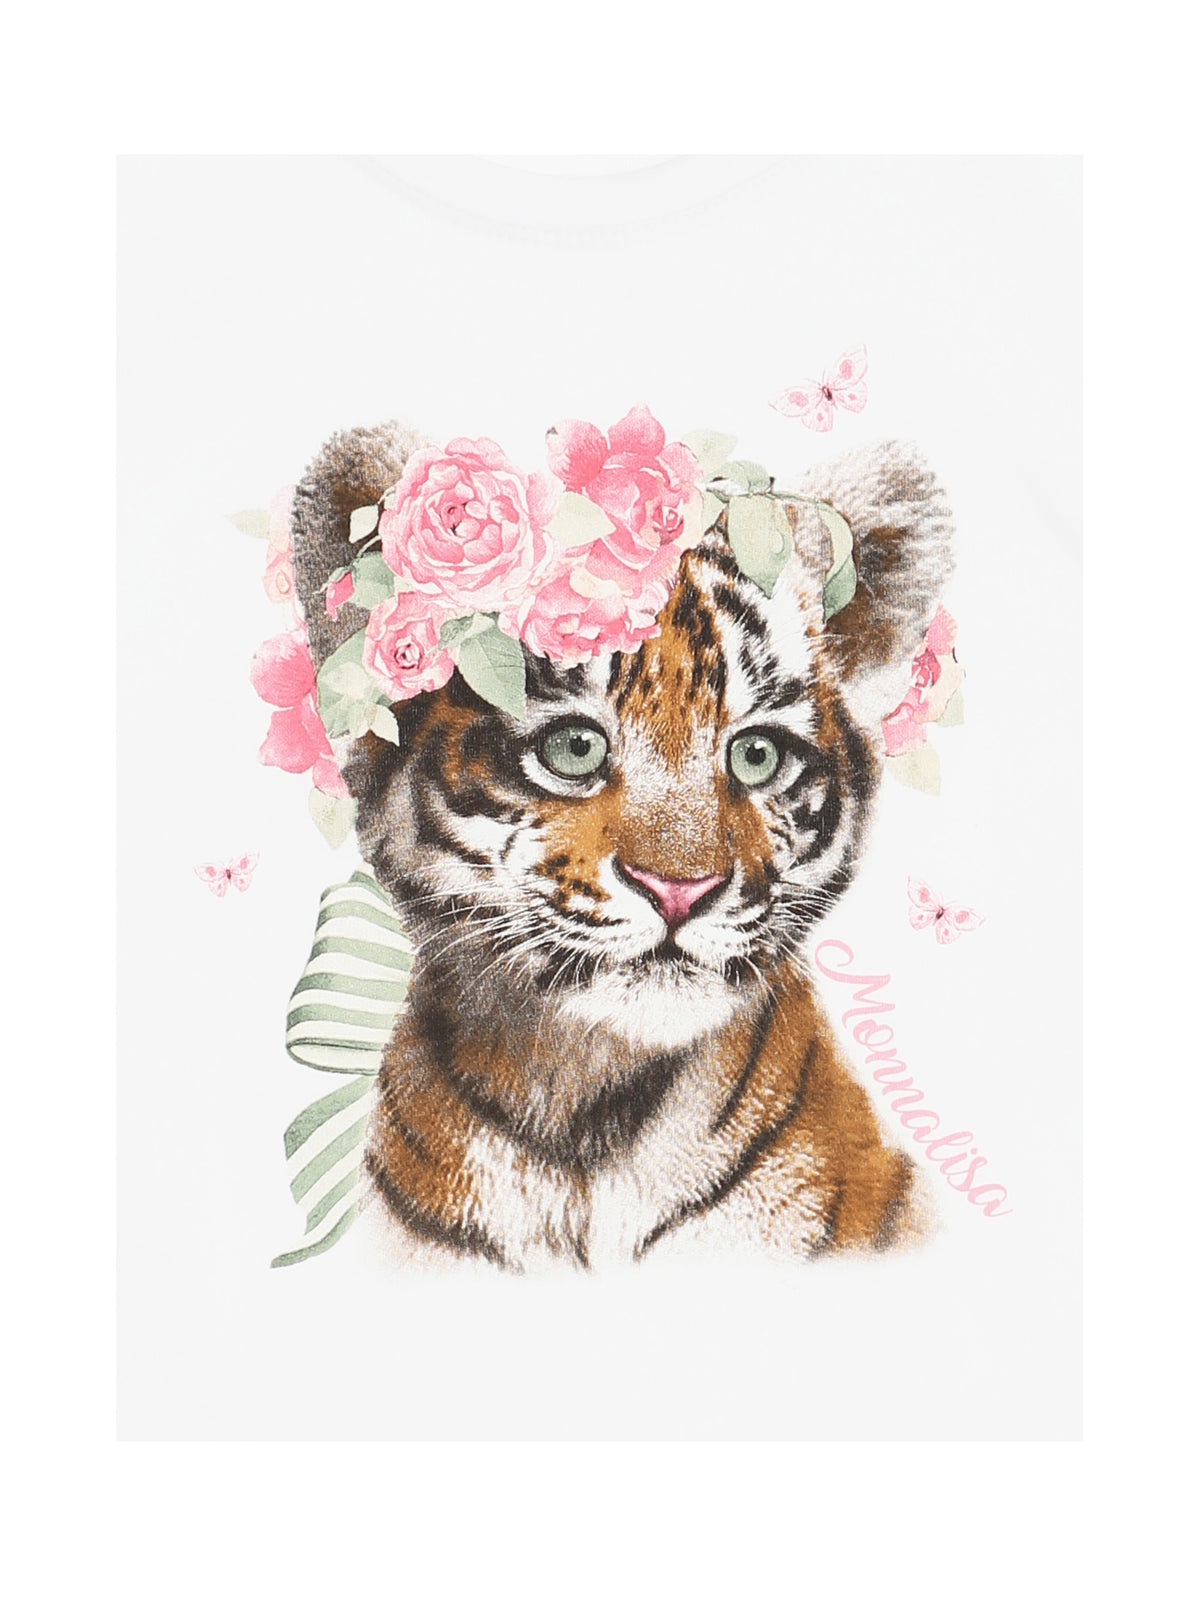 T-Shirt Tiger with Flower Crown